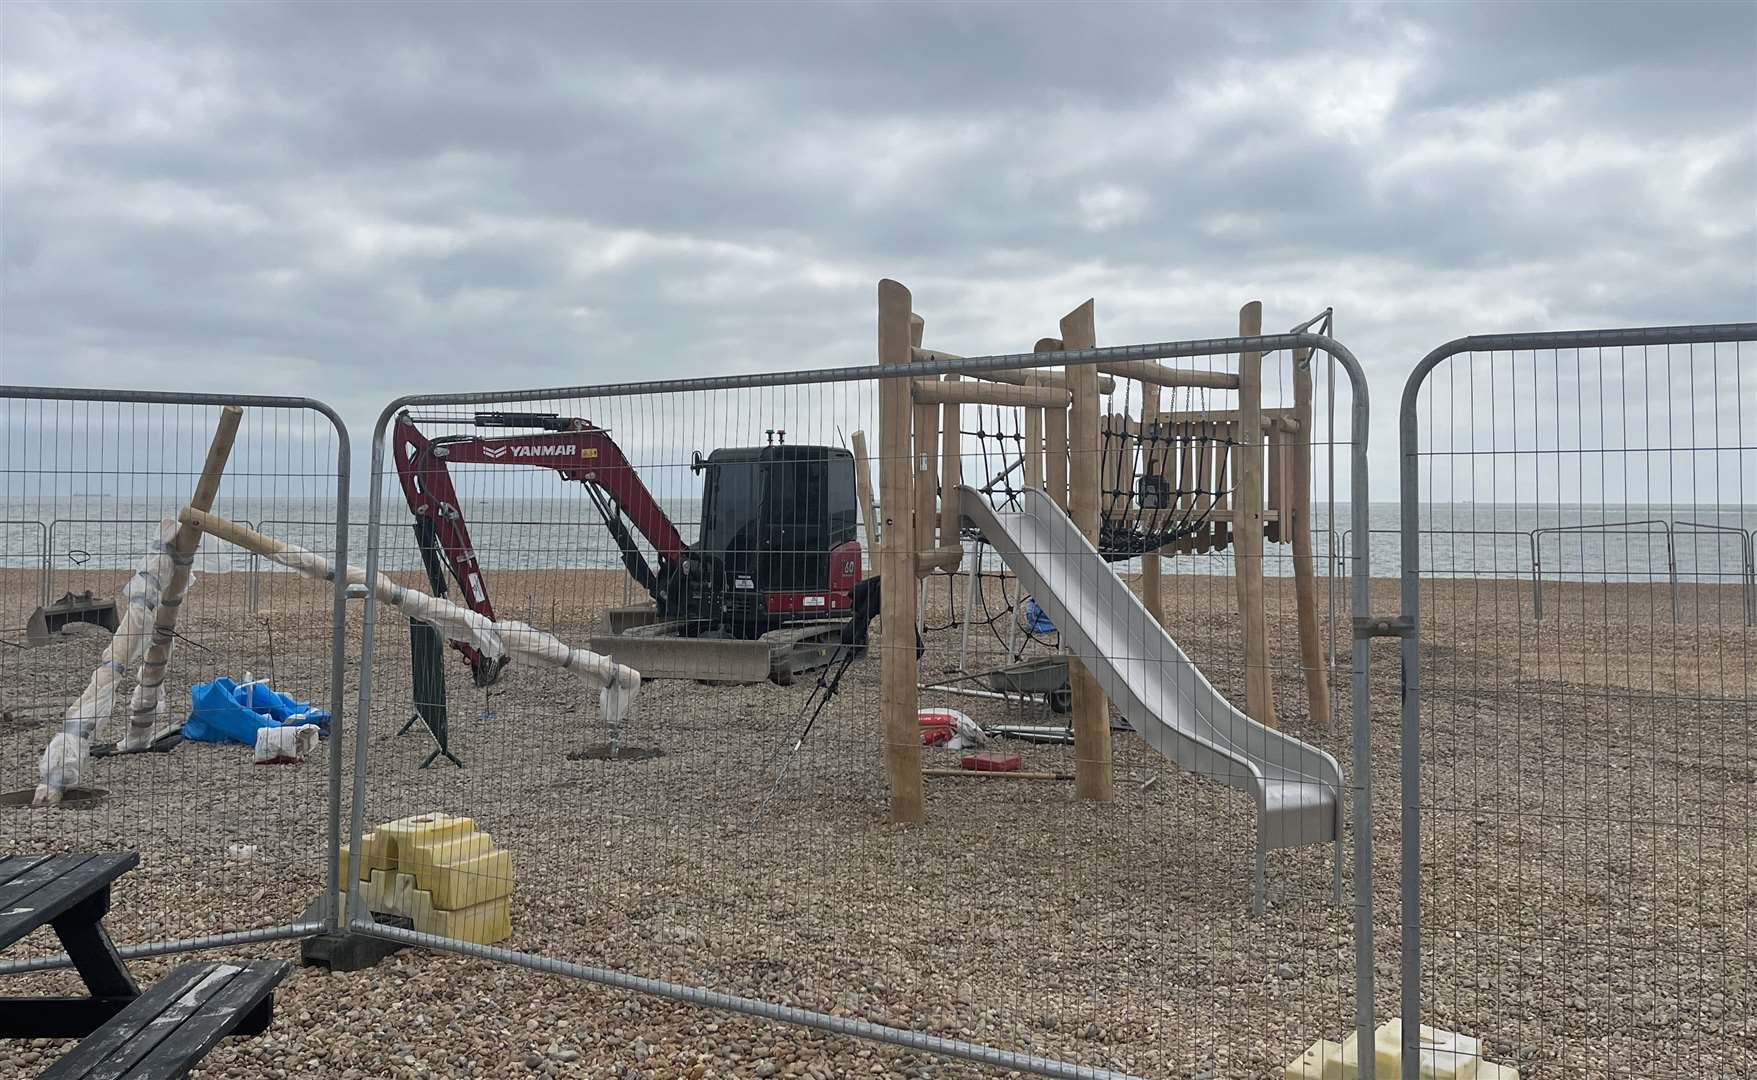 Parts of the wooden climbing frame have already been constructed for the new playpark next to Folkestone harbour arm